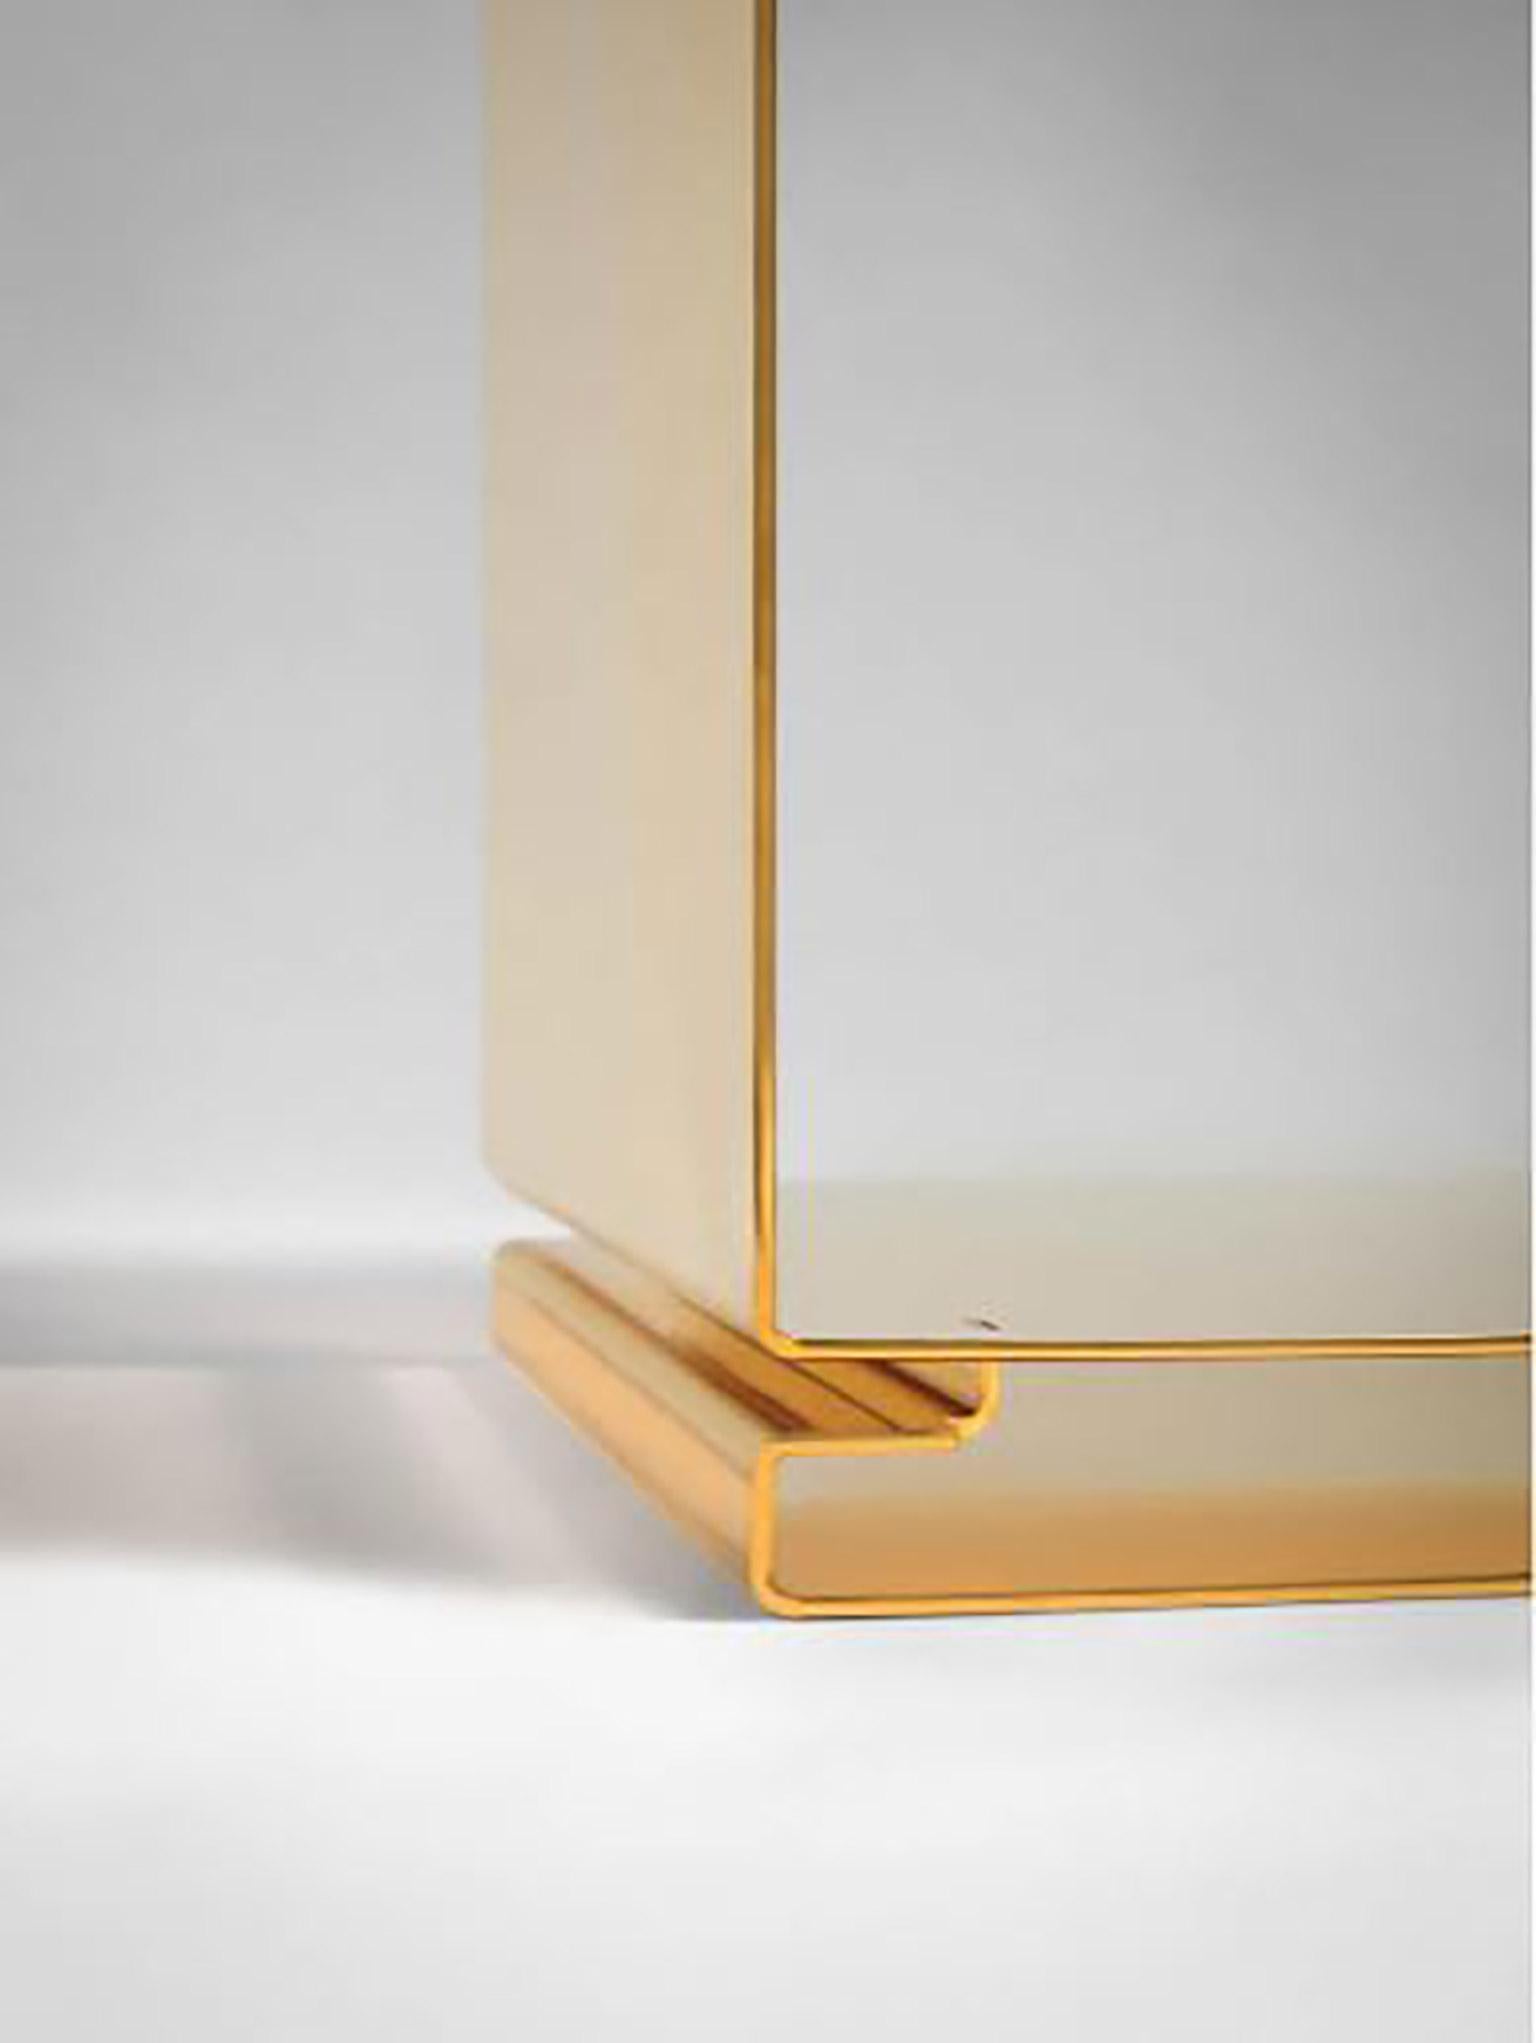 Italian Contemporary Tables of Interlocking Steel Elements, 24-Karat Gold-Plated For Sale